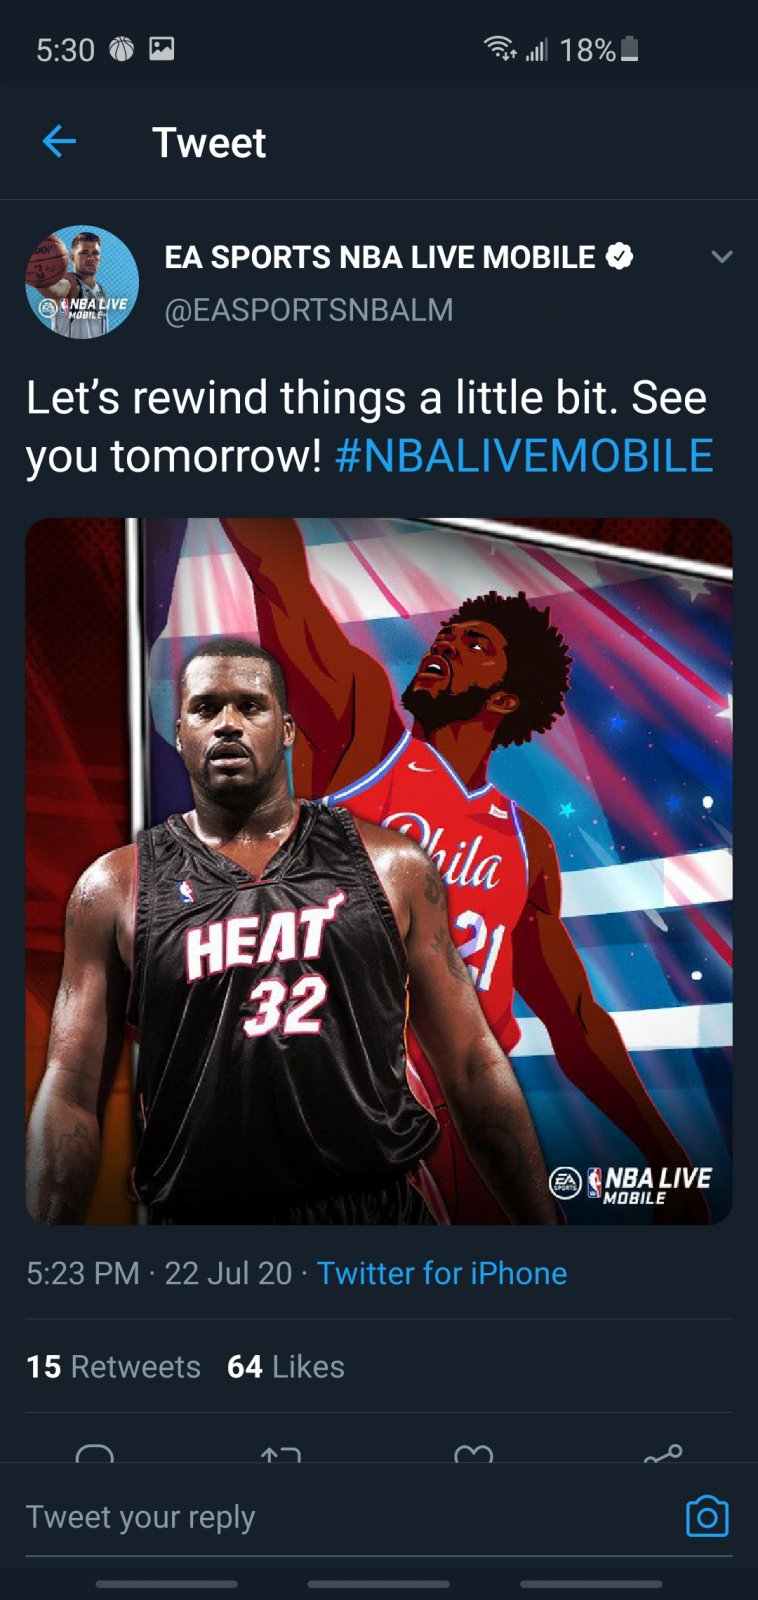 The next promo is more recycled garbage NBA Live Mobile Community